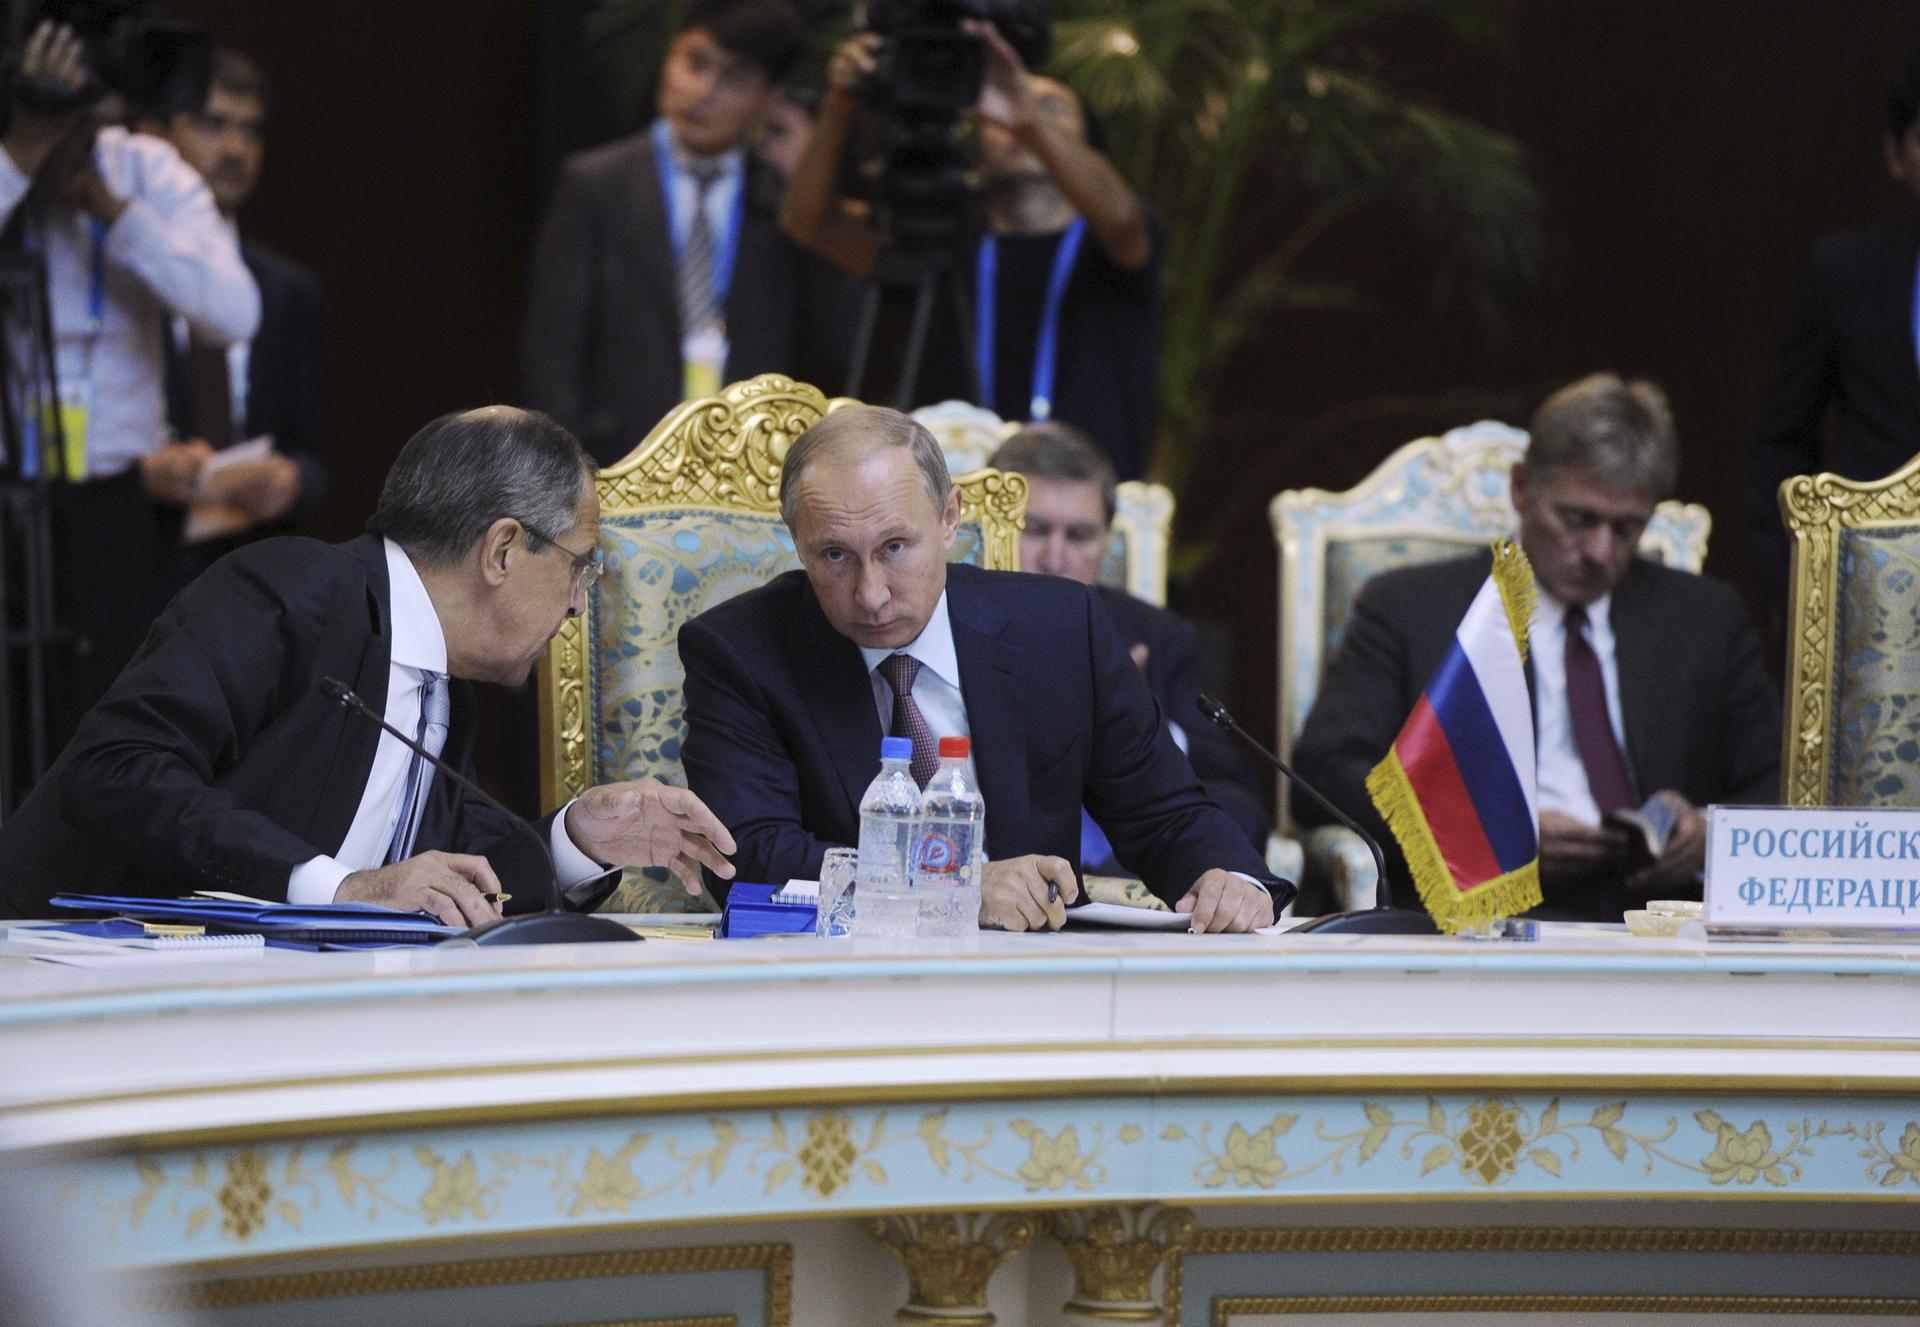 Russian President, Vladimir Putin, at a conference in Dushanbe, Tajikistan, September 15, 2015, where he underlined Russia’s support for President Bashar al-Assad of Syria.